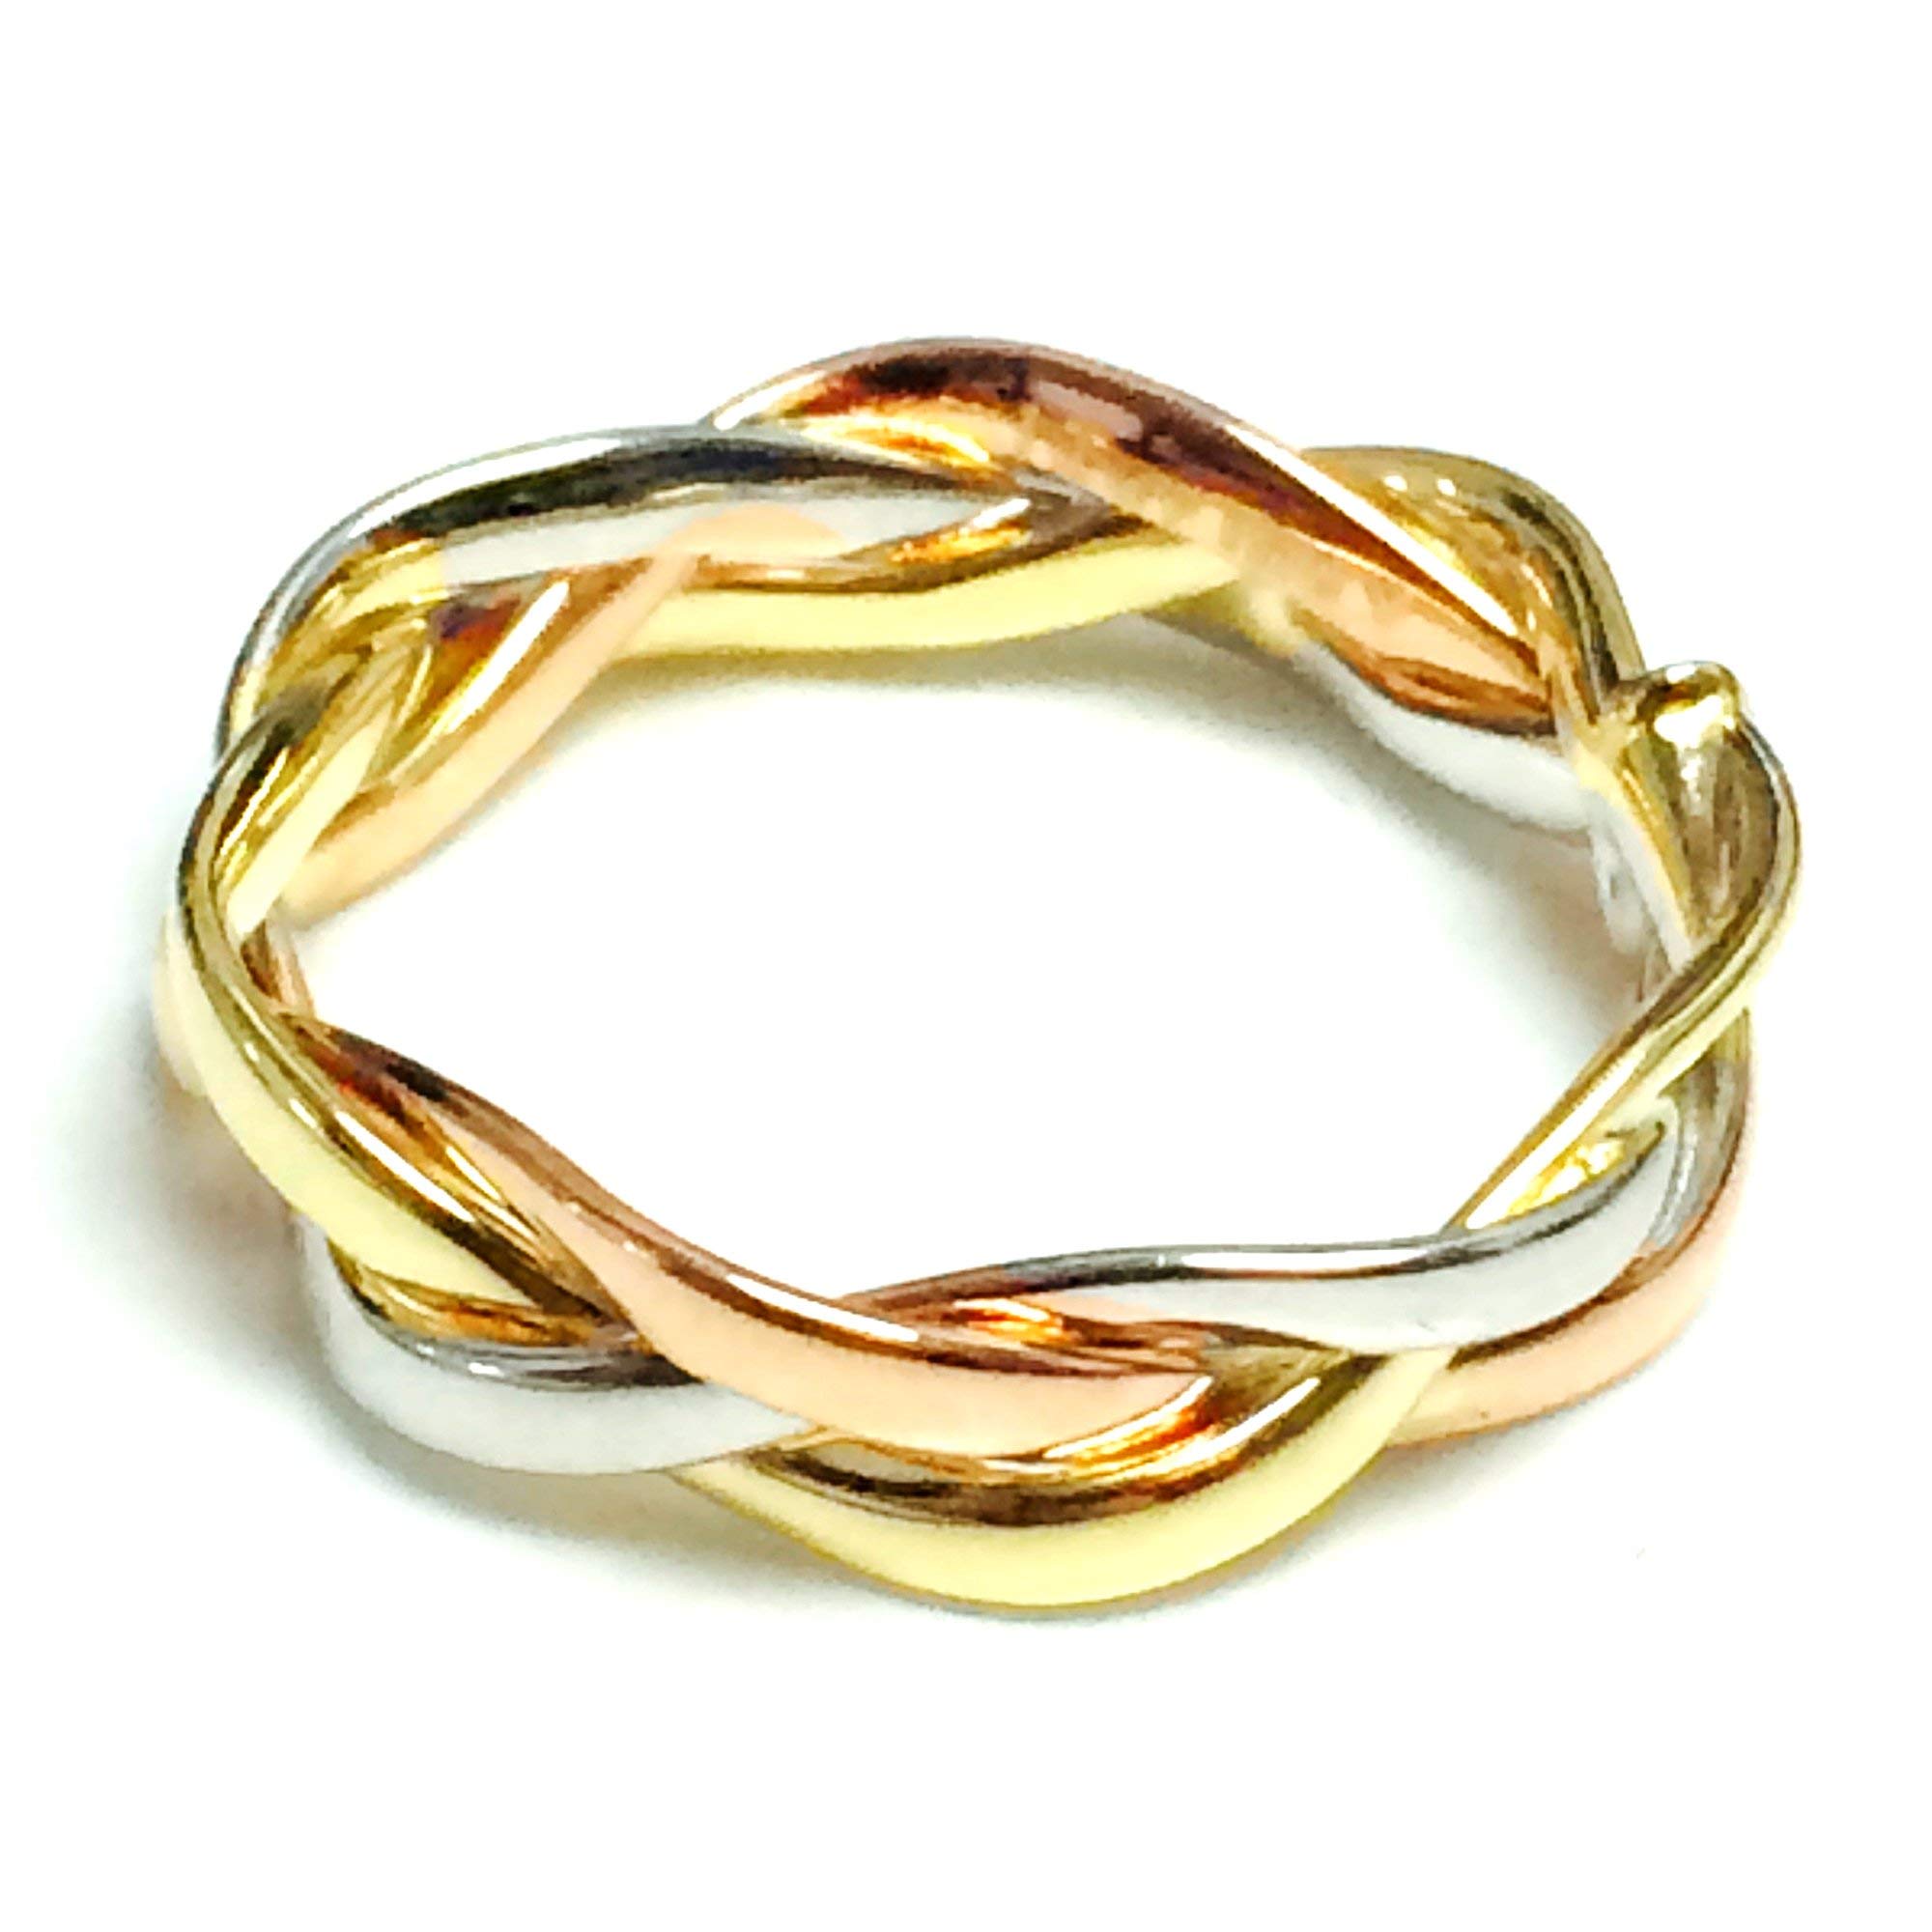 Jewelry Affairs 14K Tri-Color Gold Intertwined Braided Ring, 5mm